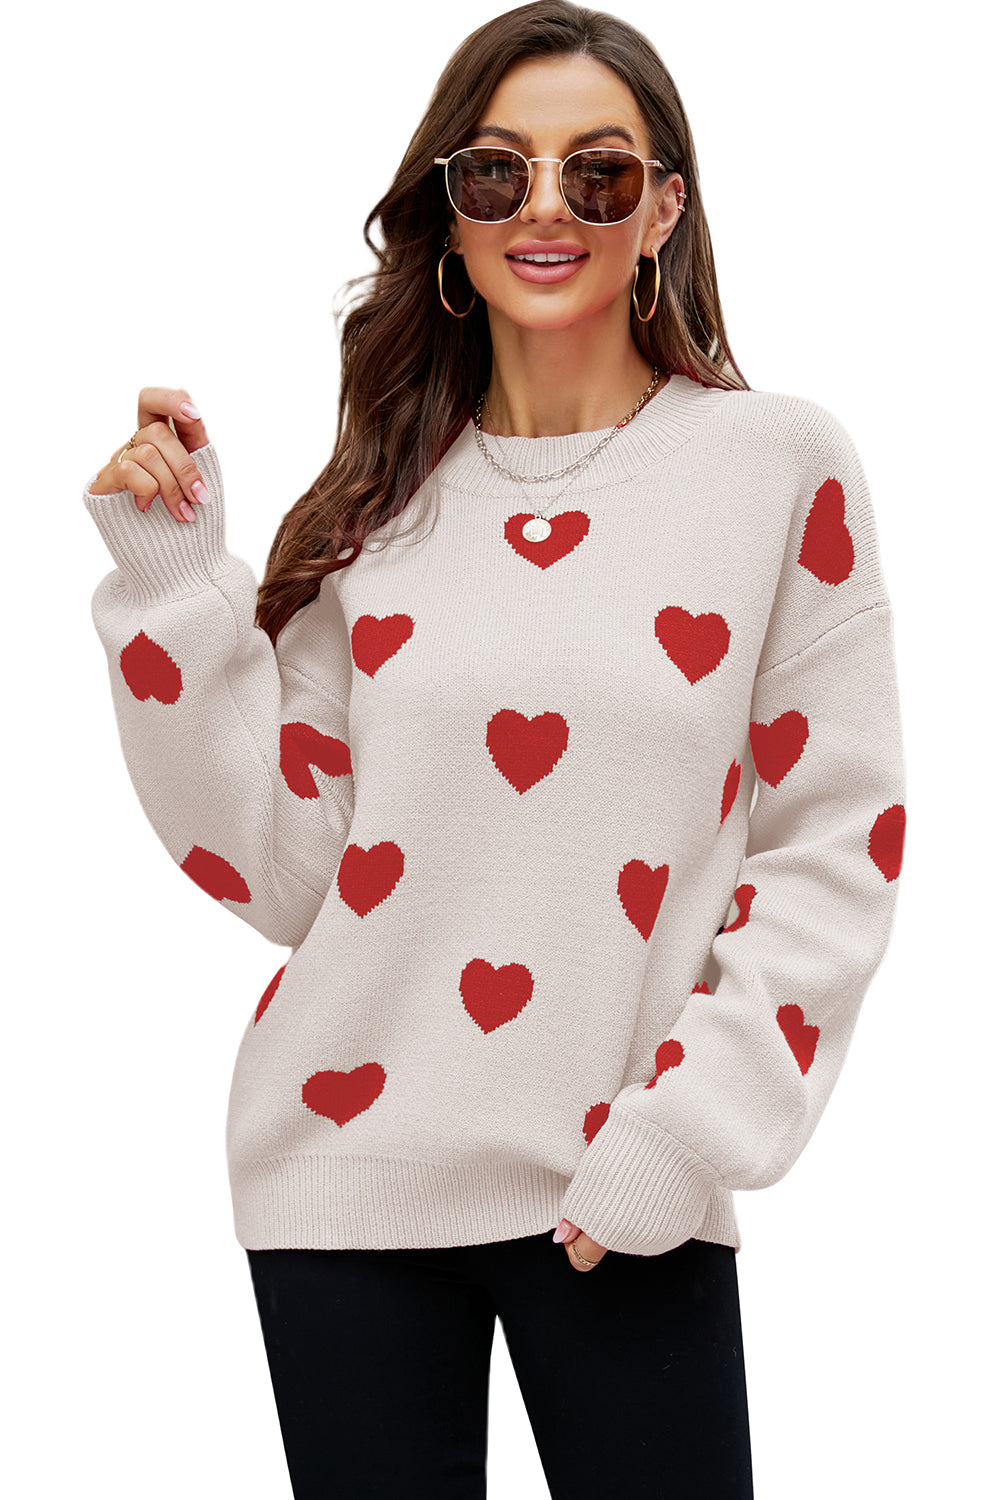 LC2722793-1018-S, LC2722793-1018-M, LC2722793-1018-L, LC2722793-1018-XL, Apricot Womens Heart Print Pullover Sweaters Valentine Tops